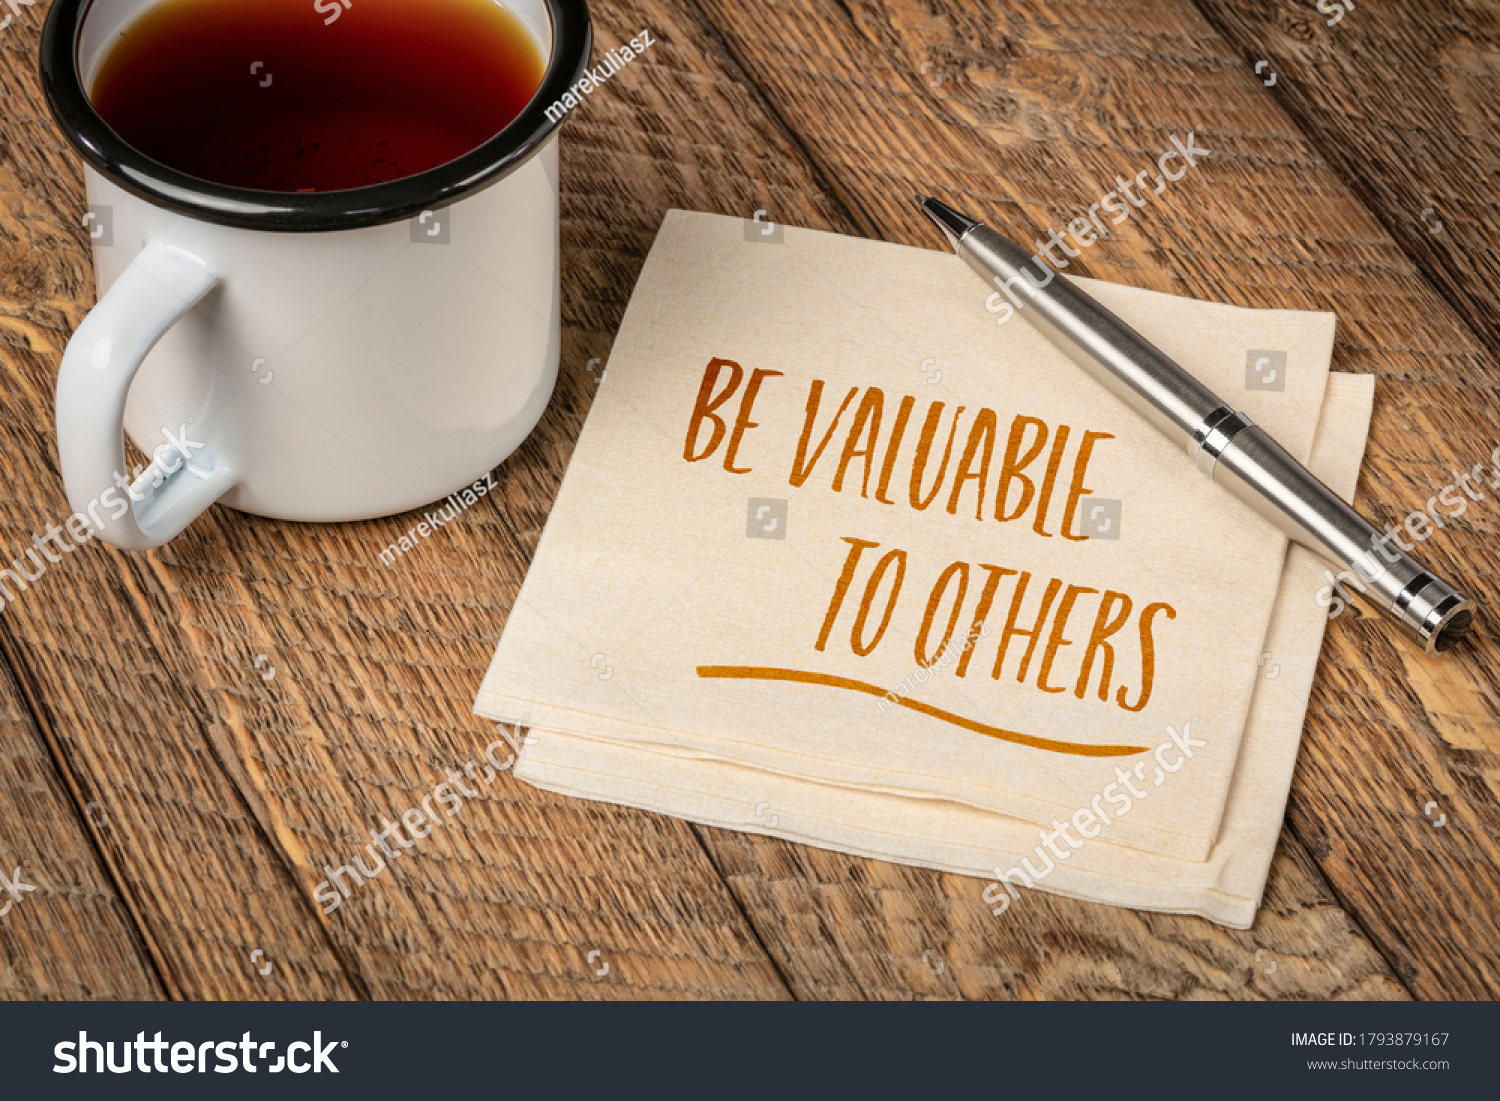 Be valuable to others - inspirational advice, handwriting on a napkin with a cup of tea, business, relationships and personal development concept #1793879167